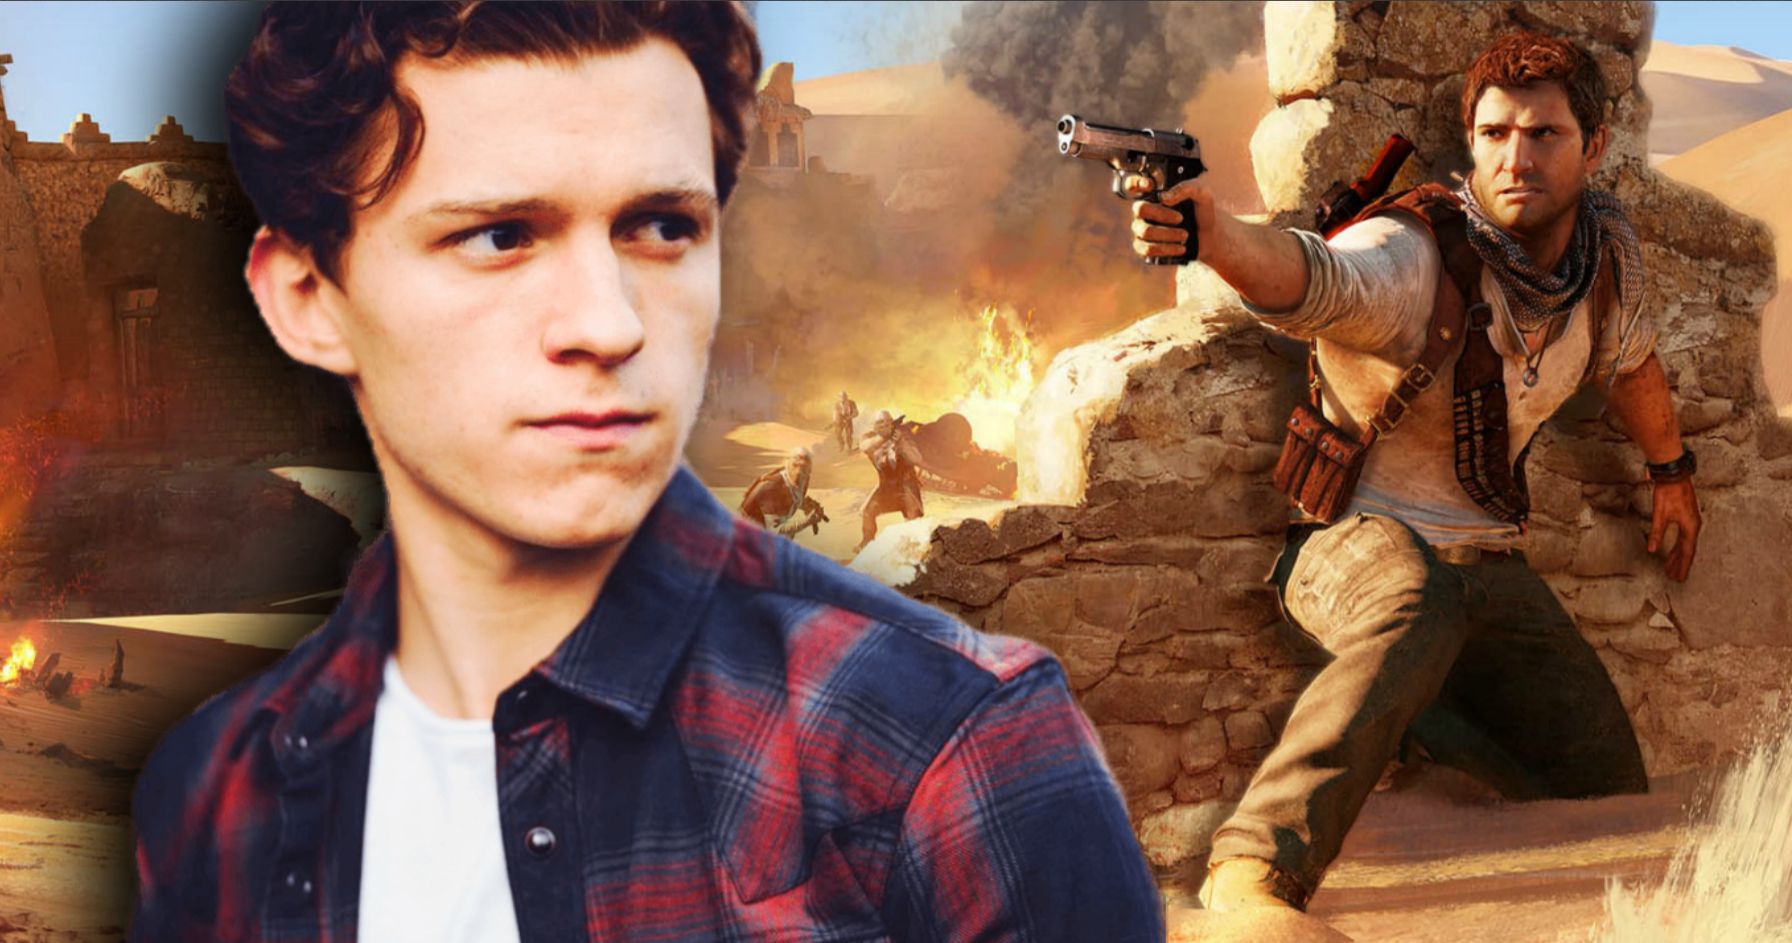 Tom Holland's Uncharted Movie Gets Christmas 2020 Release Date